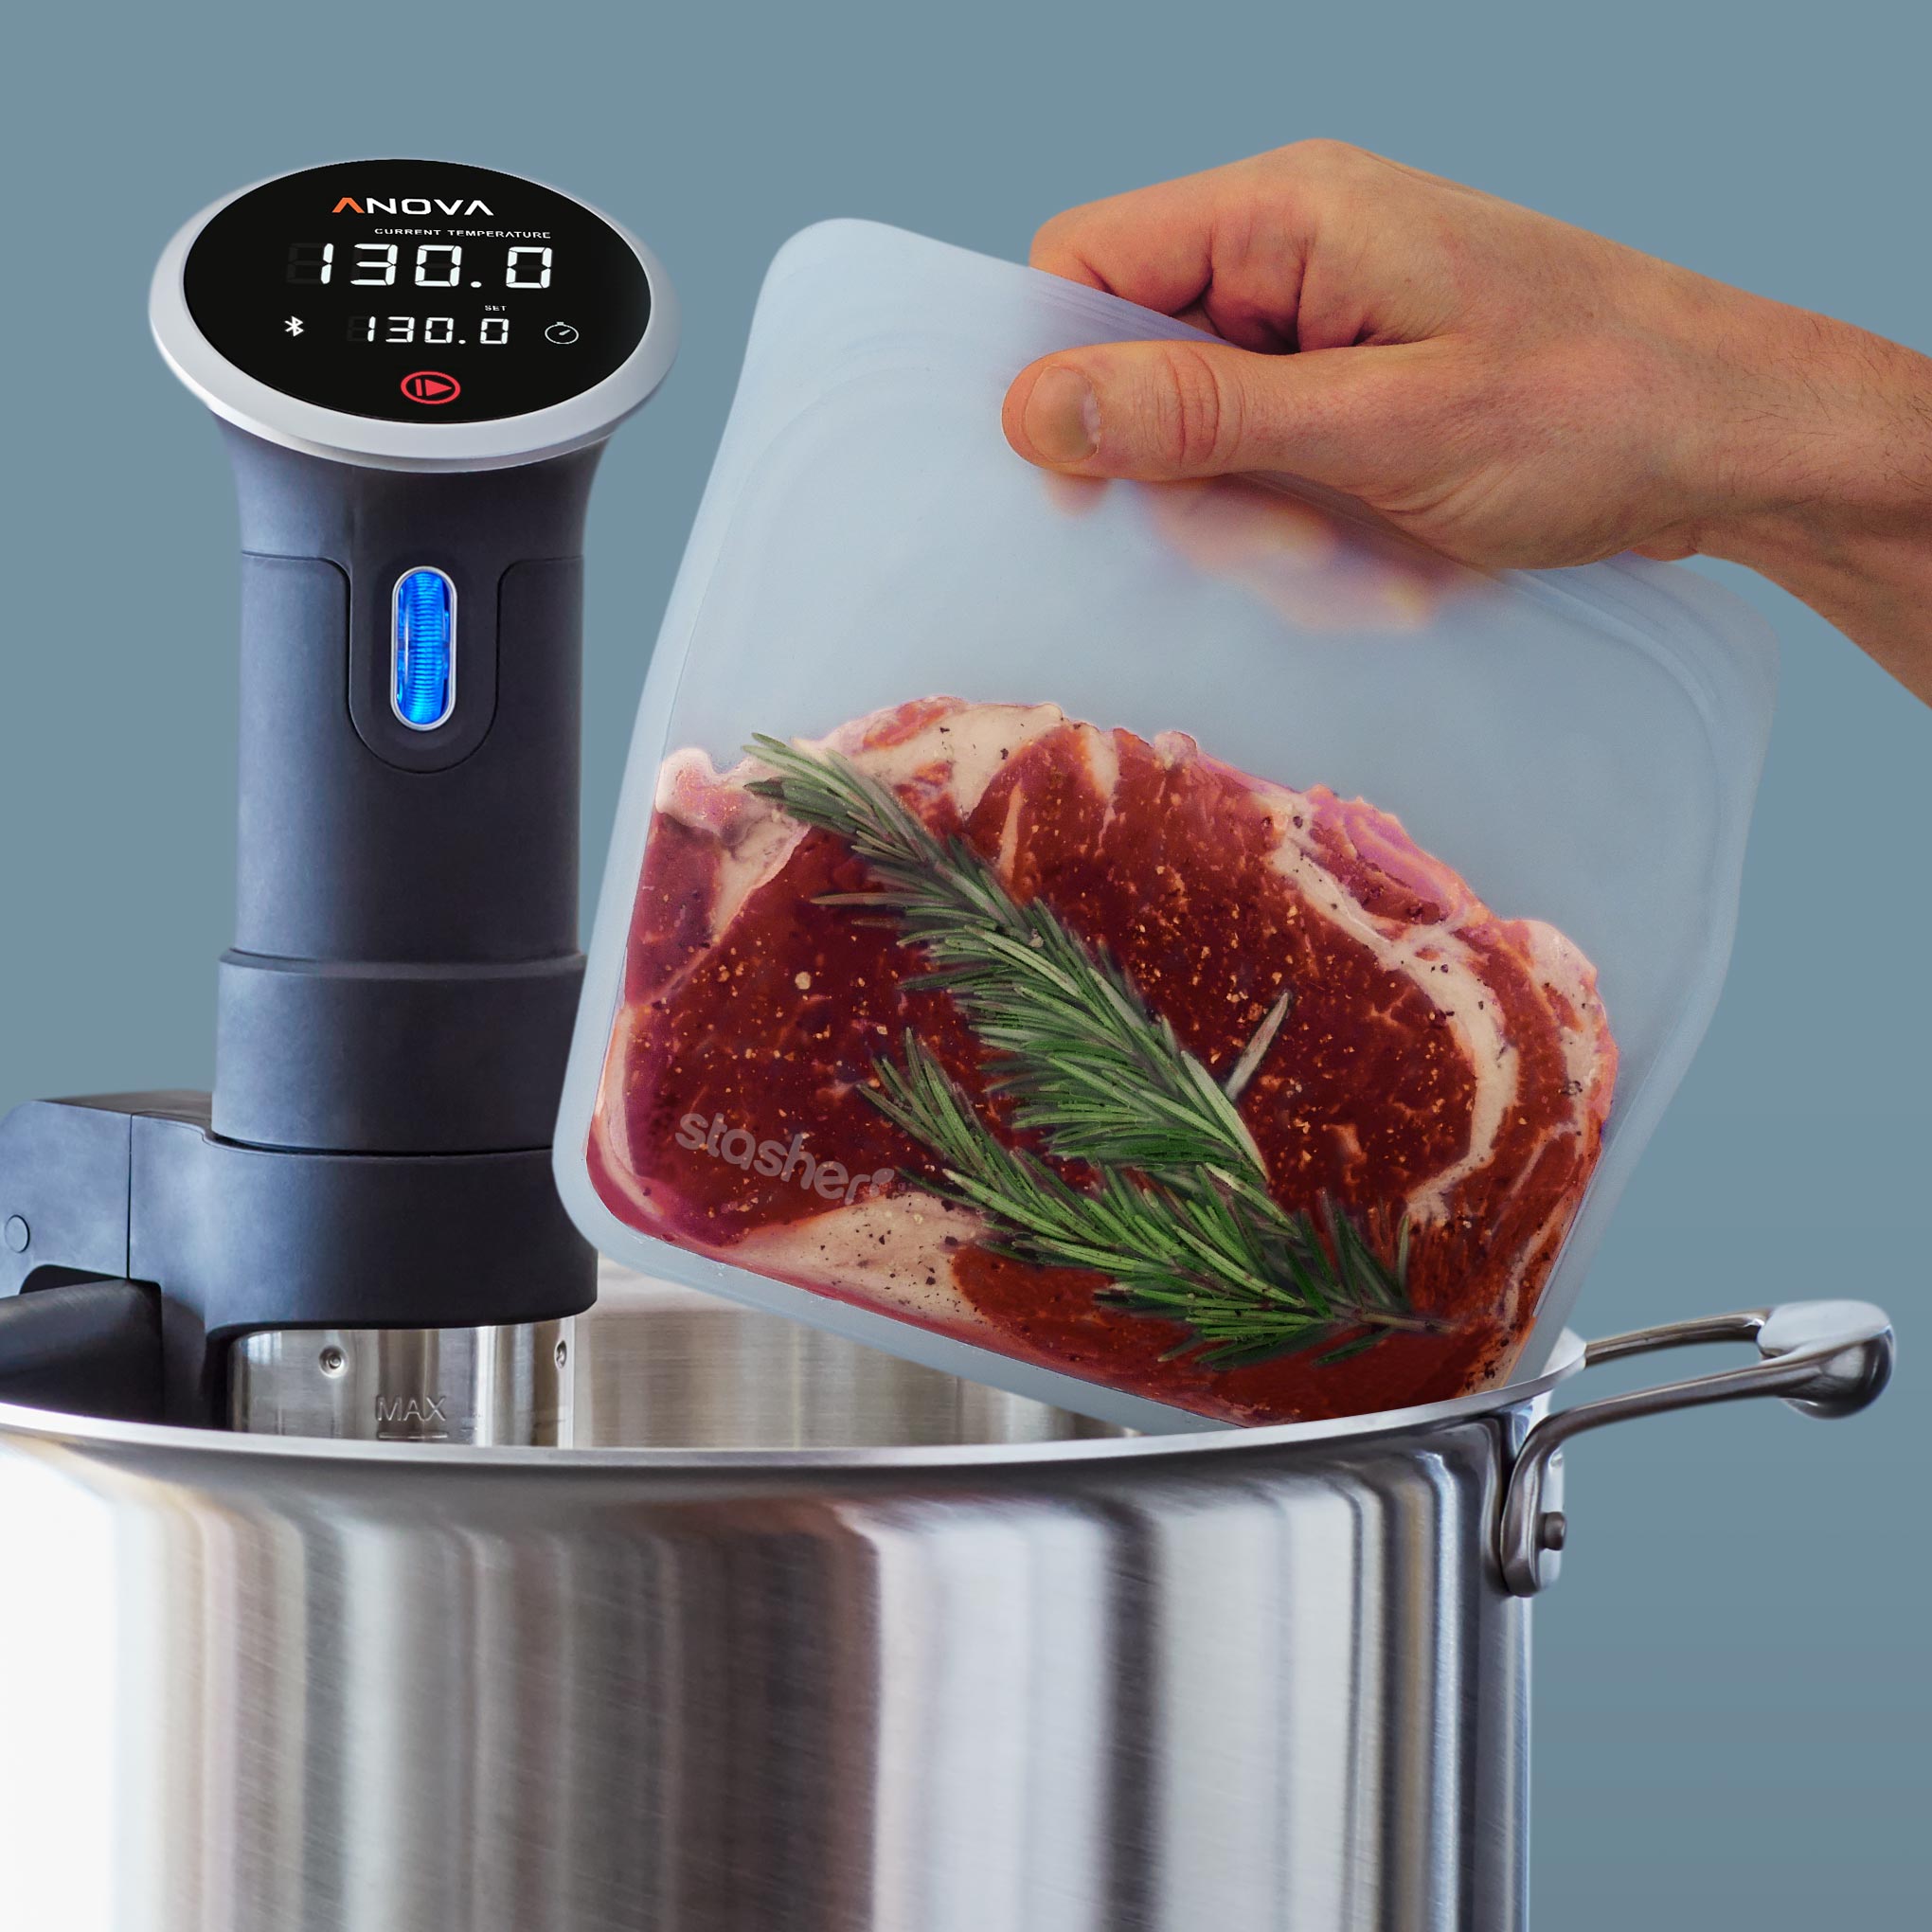 Stasher Silicone Bag Review: Great for Sous Vide Cooking